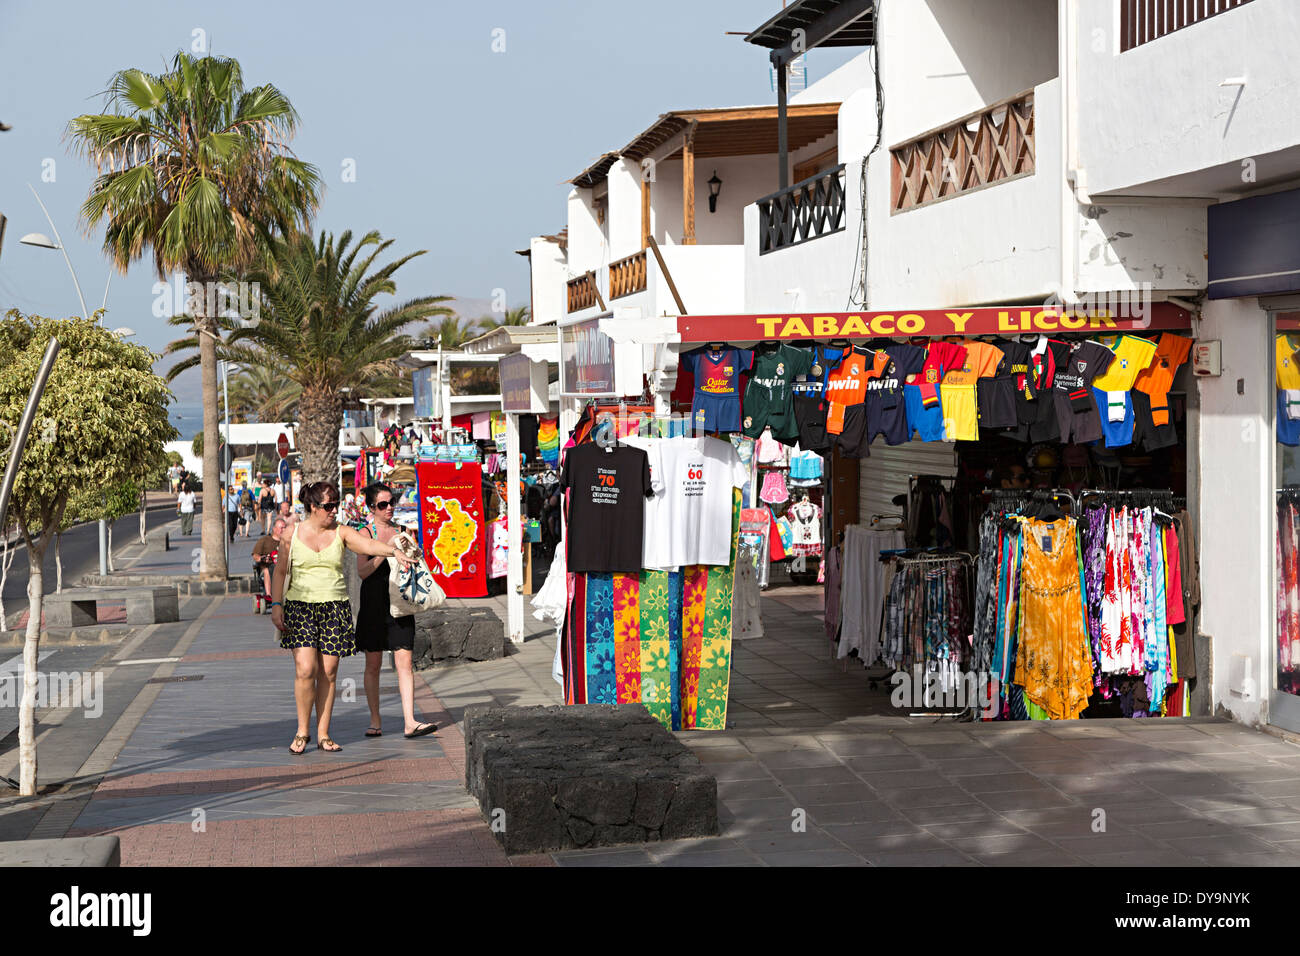 Sea front shops and people walking, Puerto Carmen, Lanzarote, Canary Islands, Spain Stock Photo